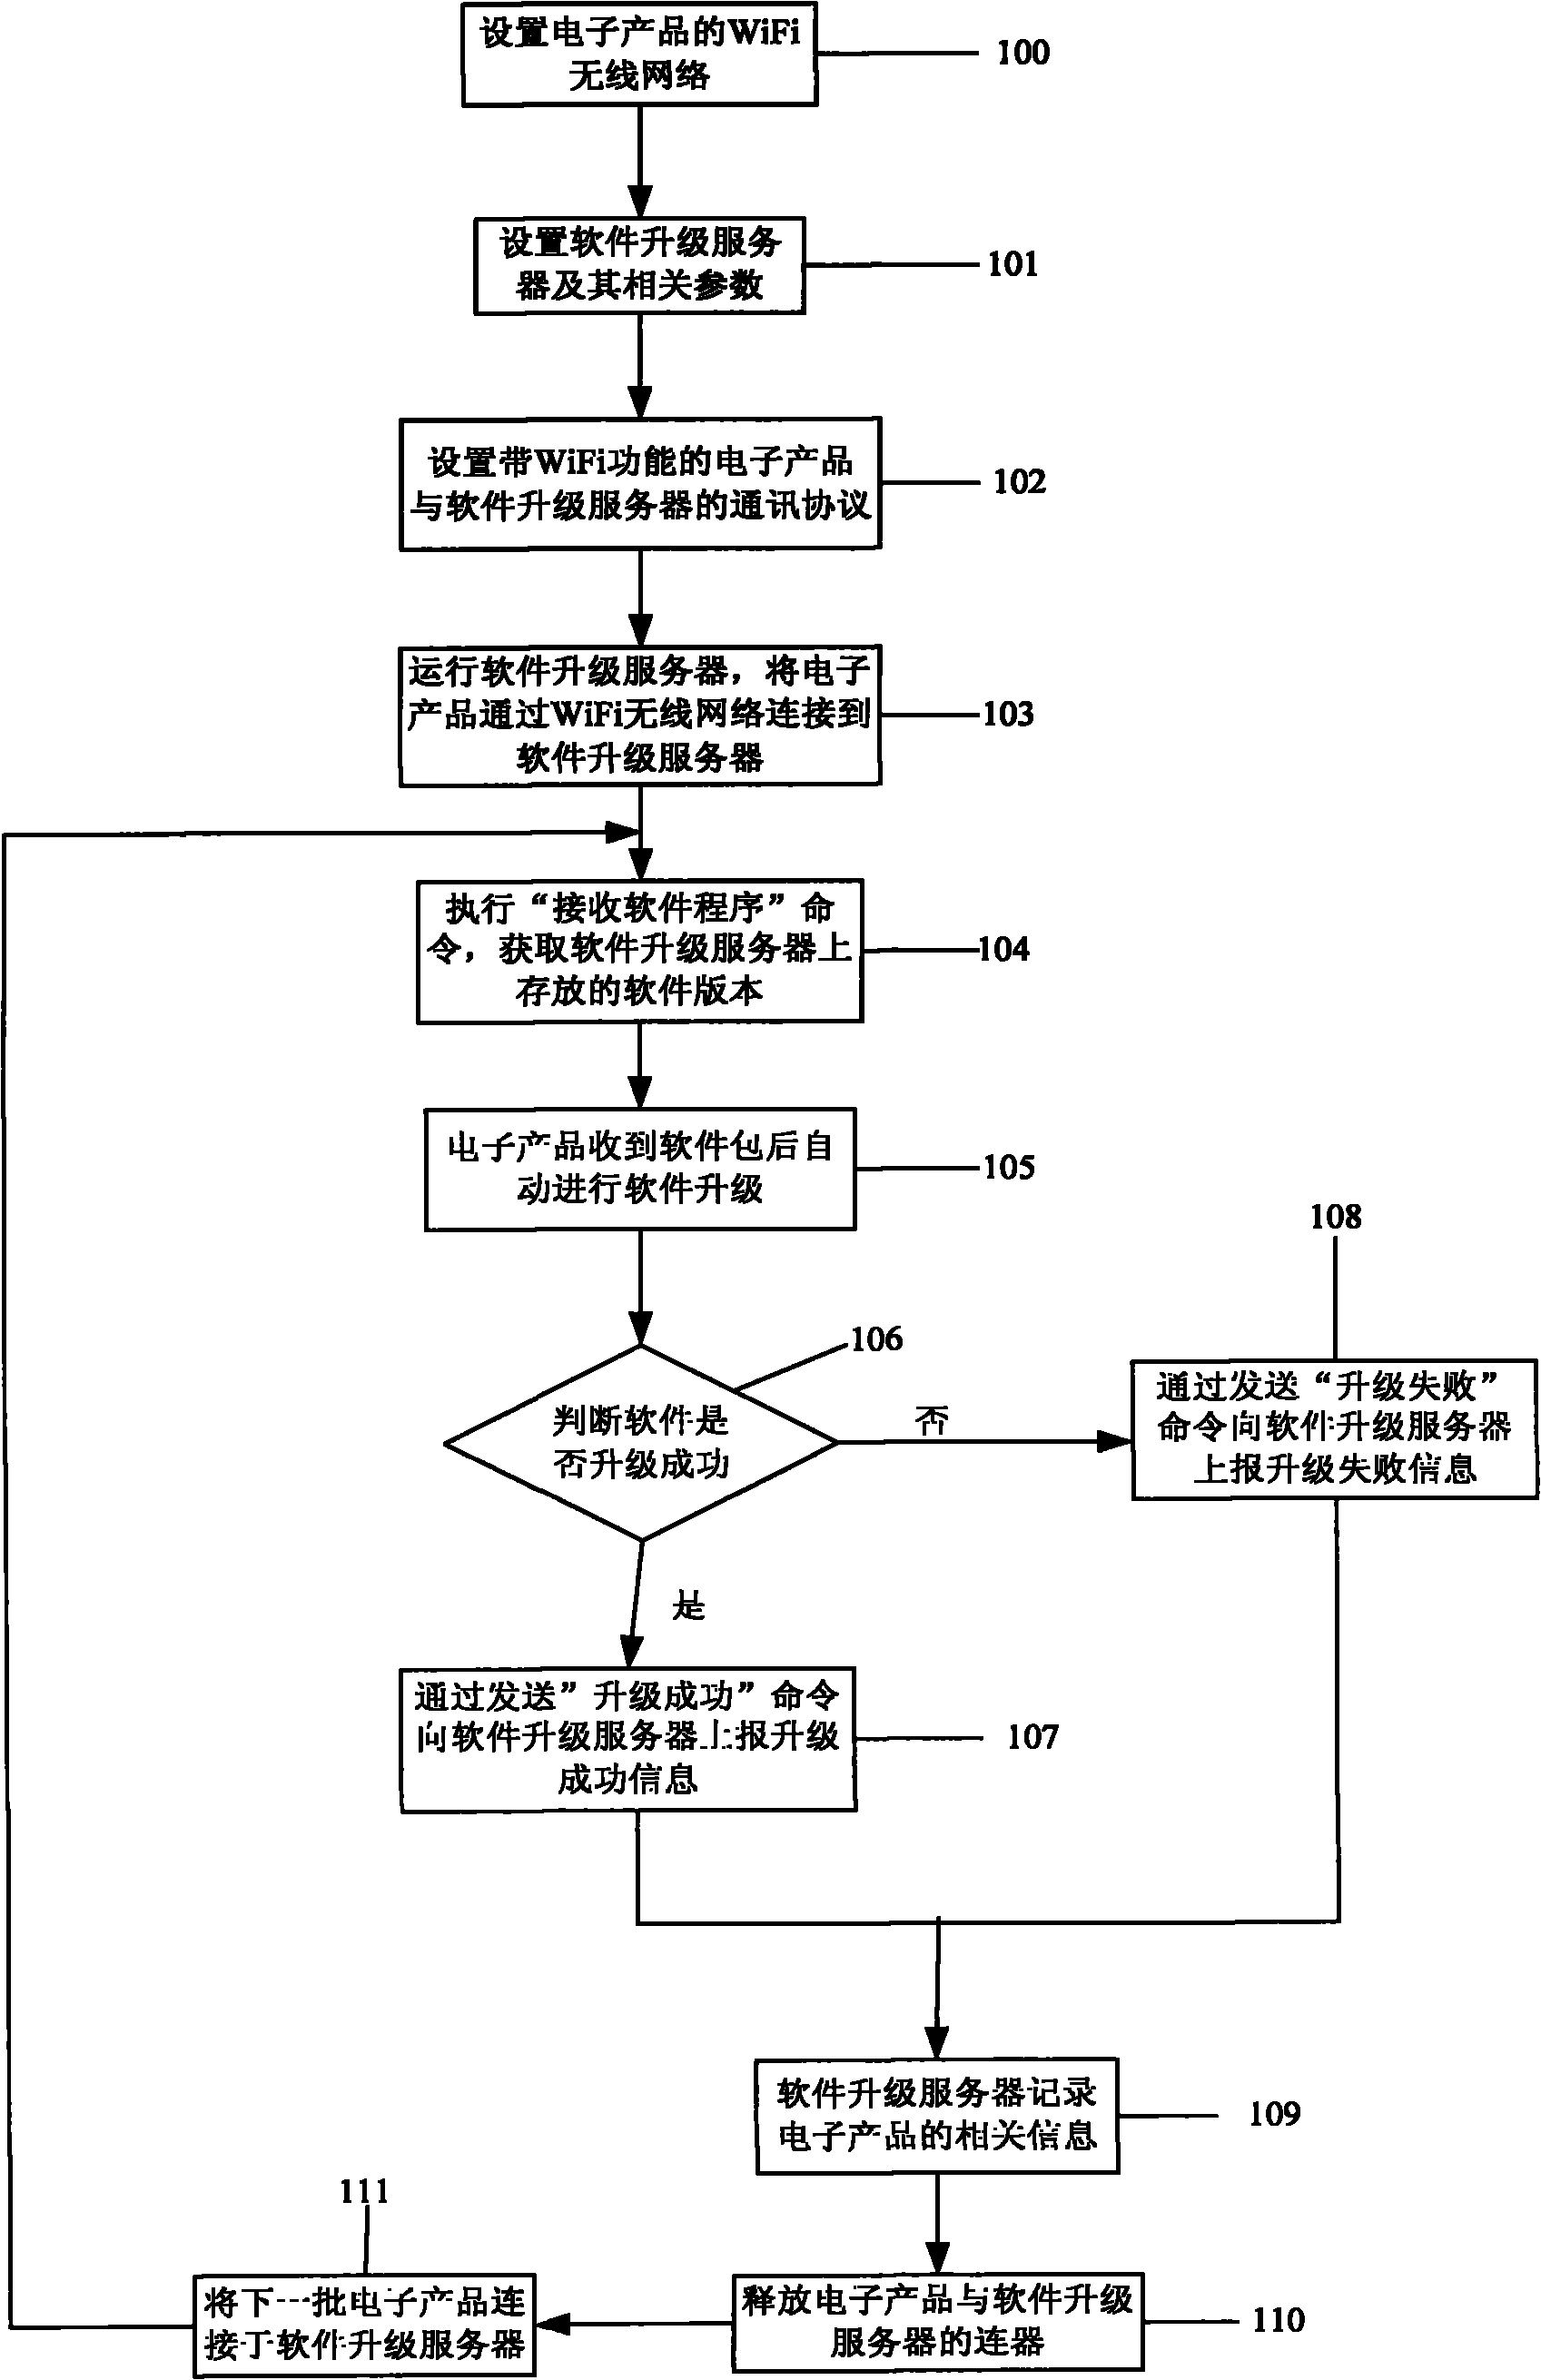 Method for upgrading device software by WiFi wireless network